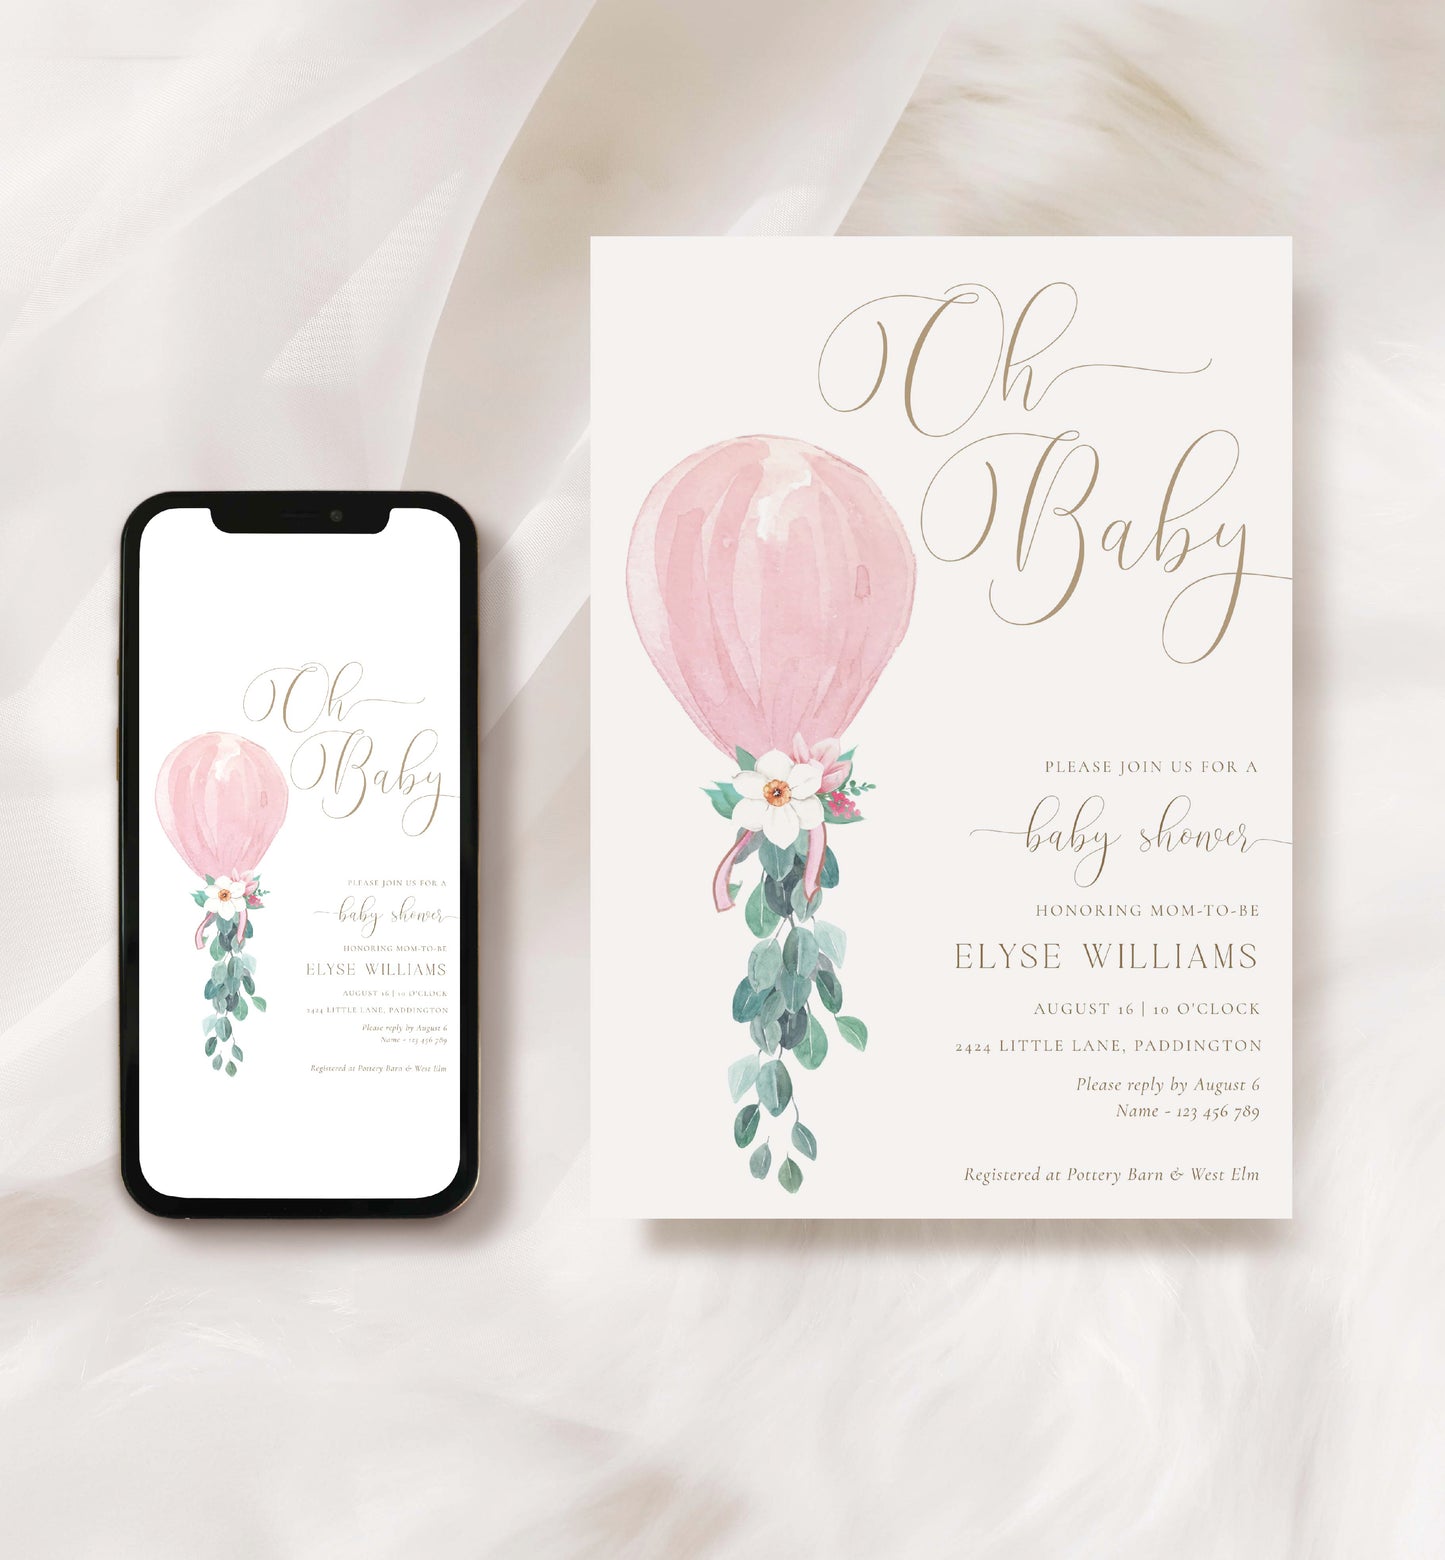 Oh Baby Baby Shower Invitation Template, Printable Pink Balloon Baby Shower Invite, Editable Girl Baby Baby Shower Invite, Darlington